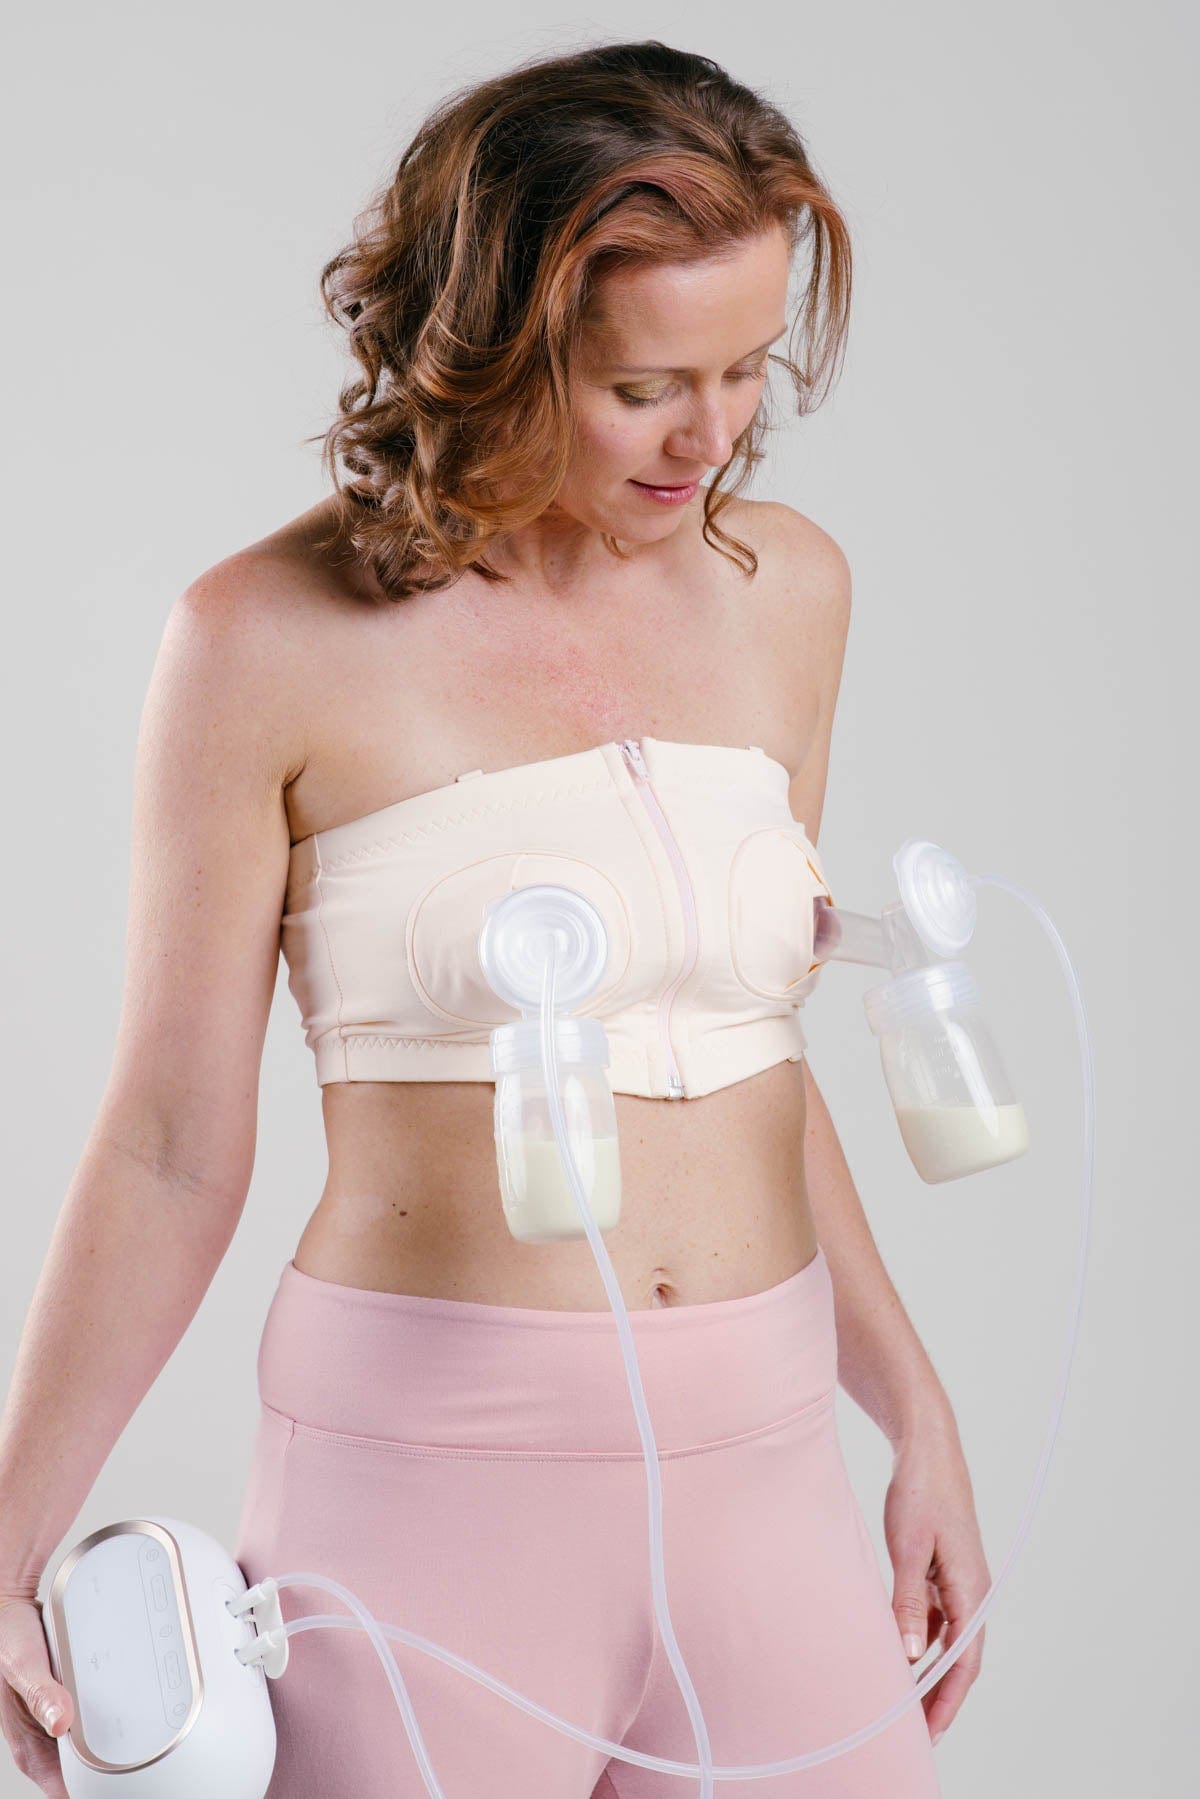 Simple Wishes Hands Free Breast Pump Bra - New Mother New Baby Store